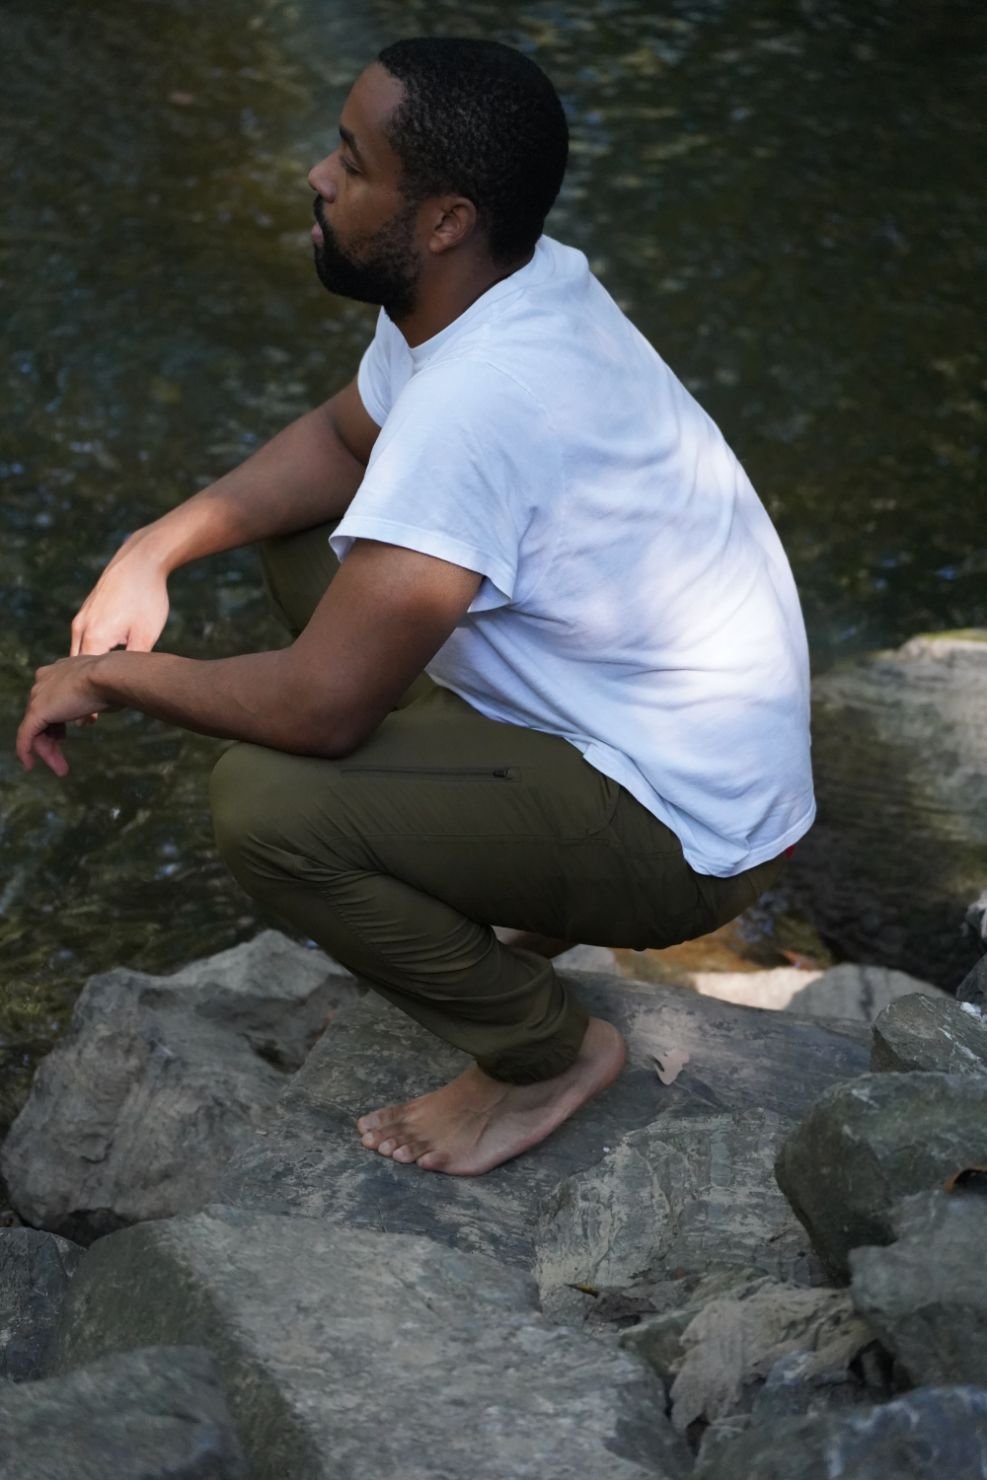 The author in a squat position to illustrate the stretchiness of the Outdoor Research Zendo hiking pants